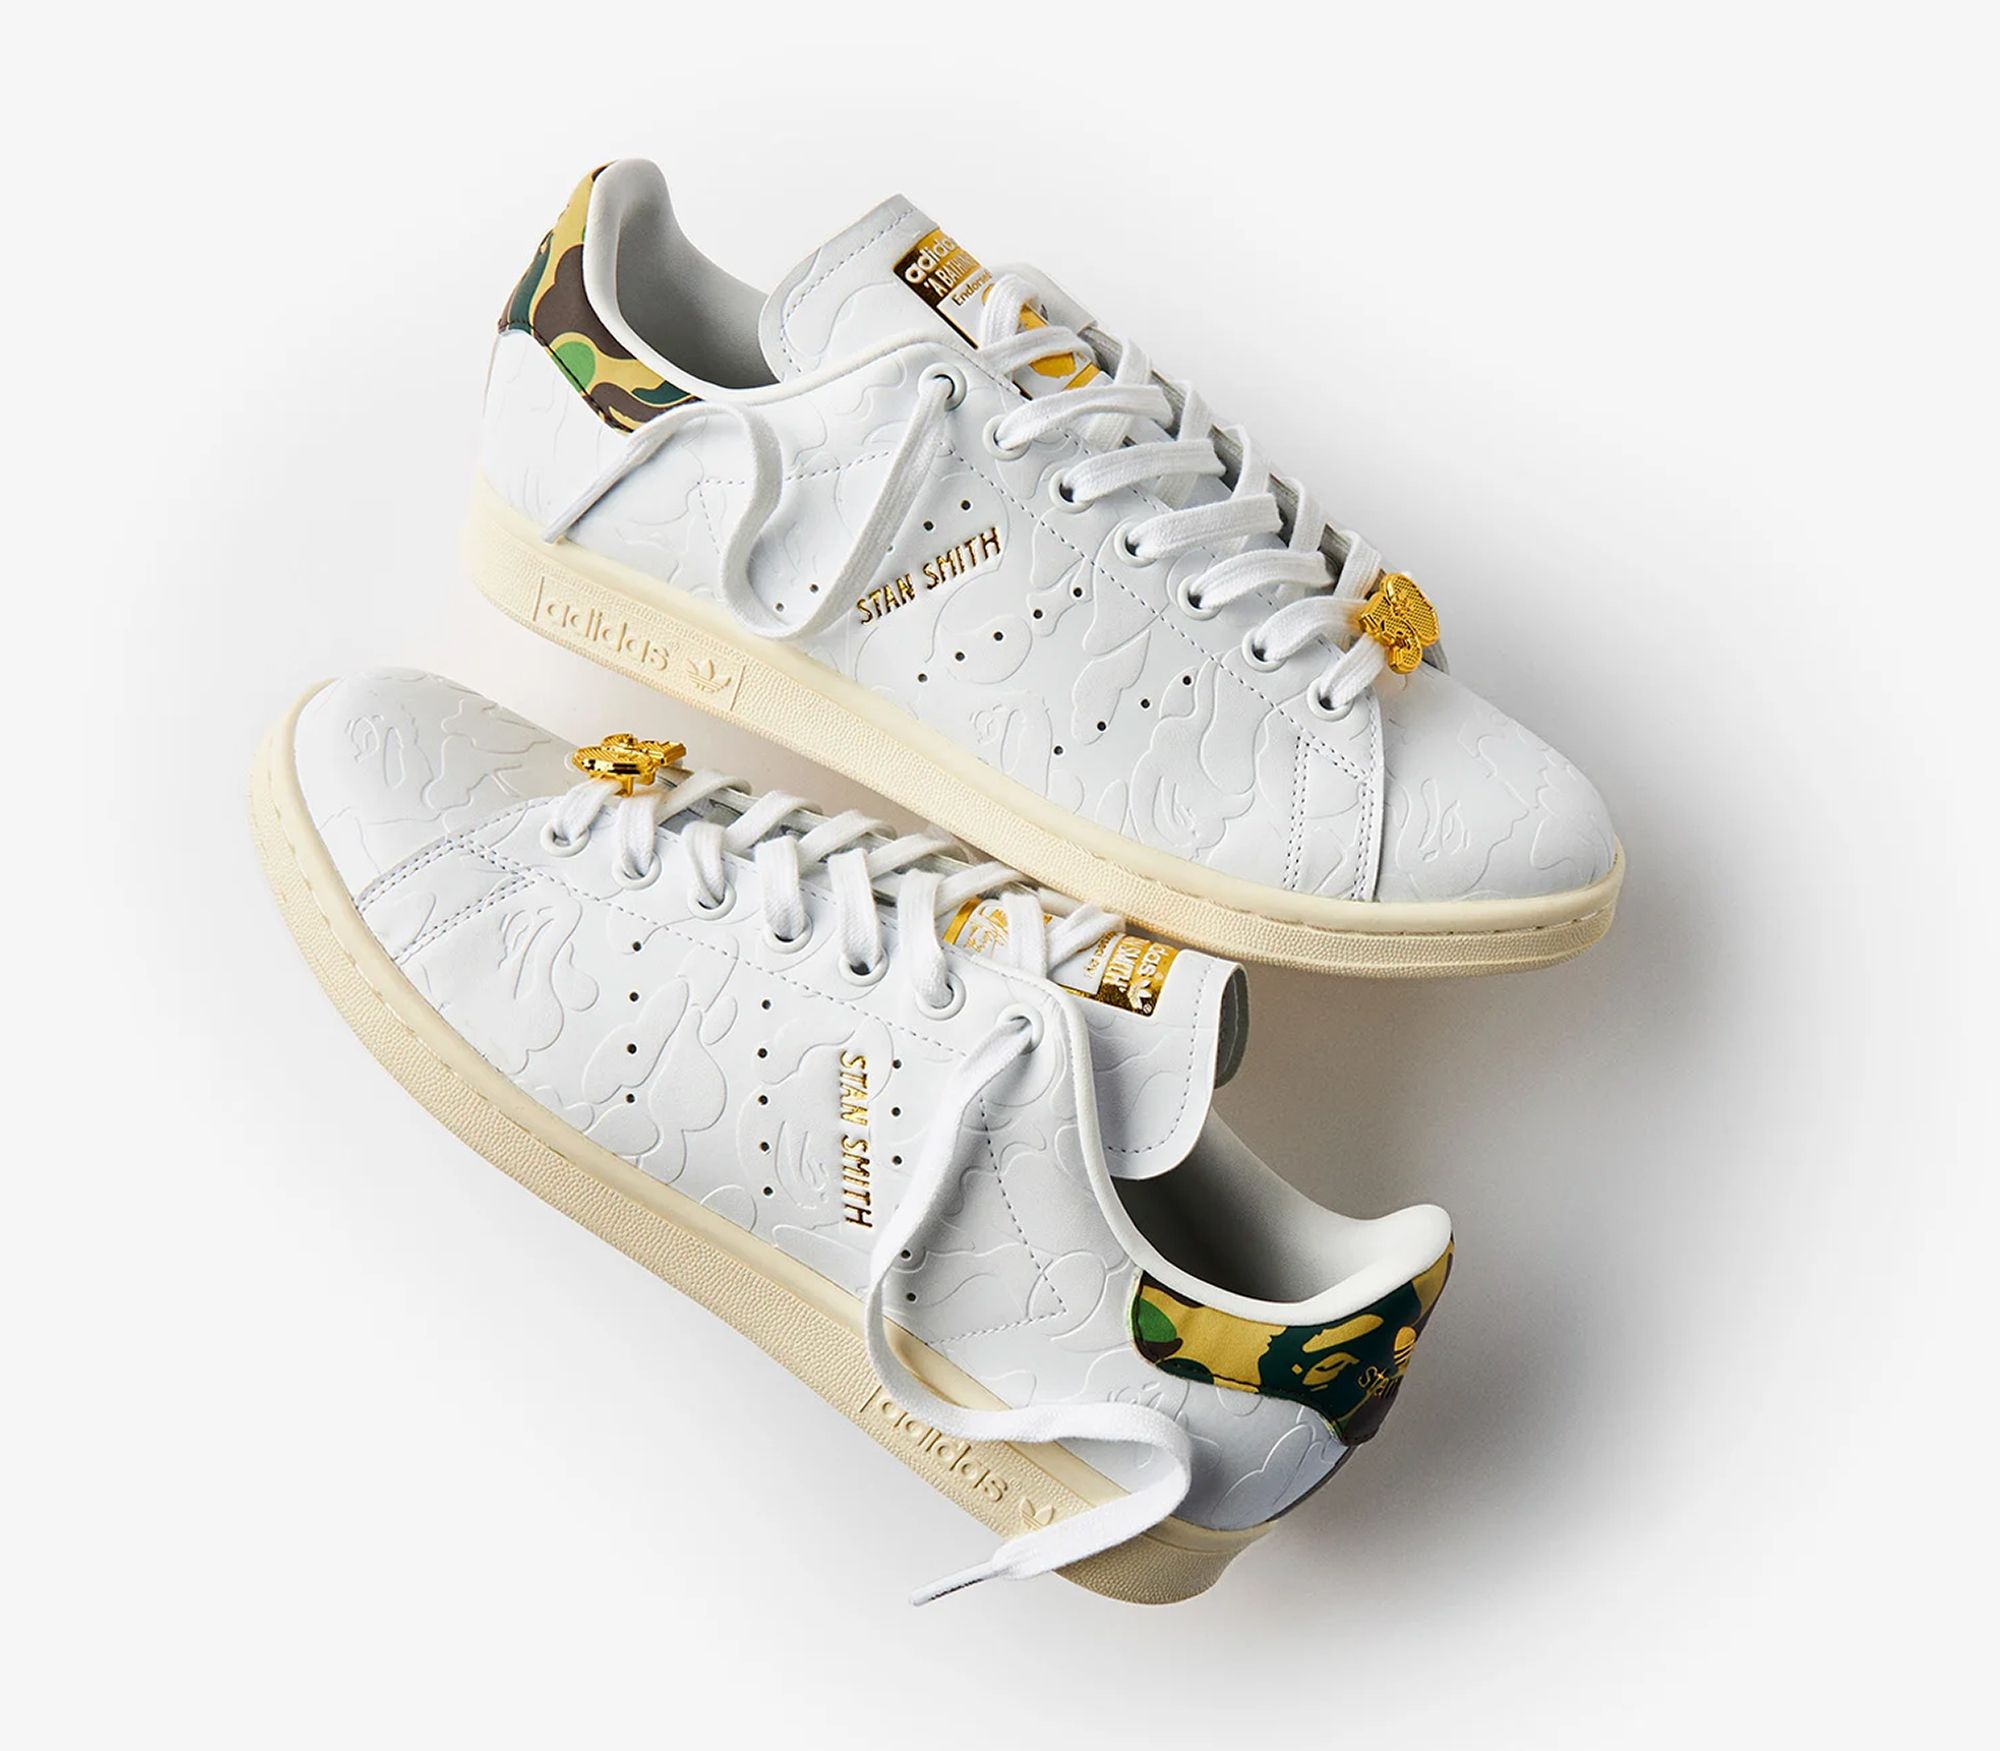 The Bape x Adidas Stan Smith Releases November 18 | House of Heat°